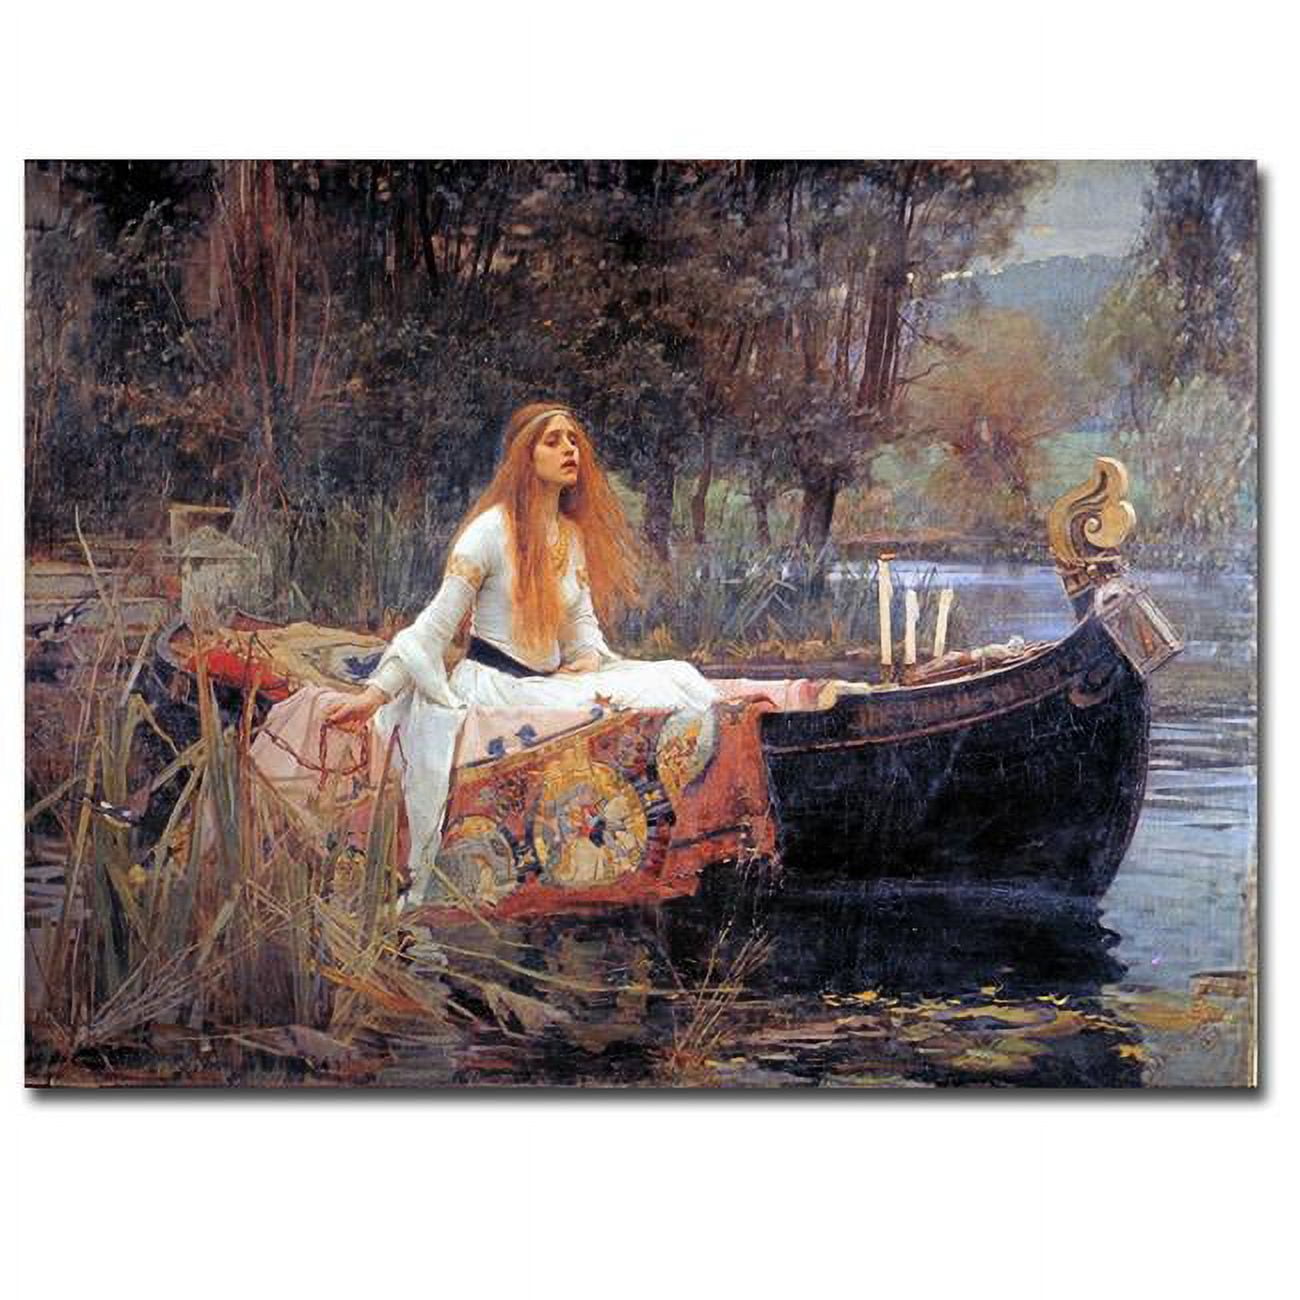 1216x835sag The Lady Of Shalott By John Waterhouse Premium Gallery-wrapped Canvas Giclee Art - 12 X 16 X 1.5 In.